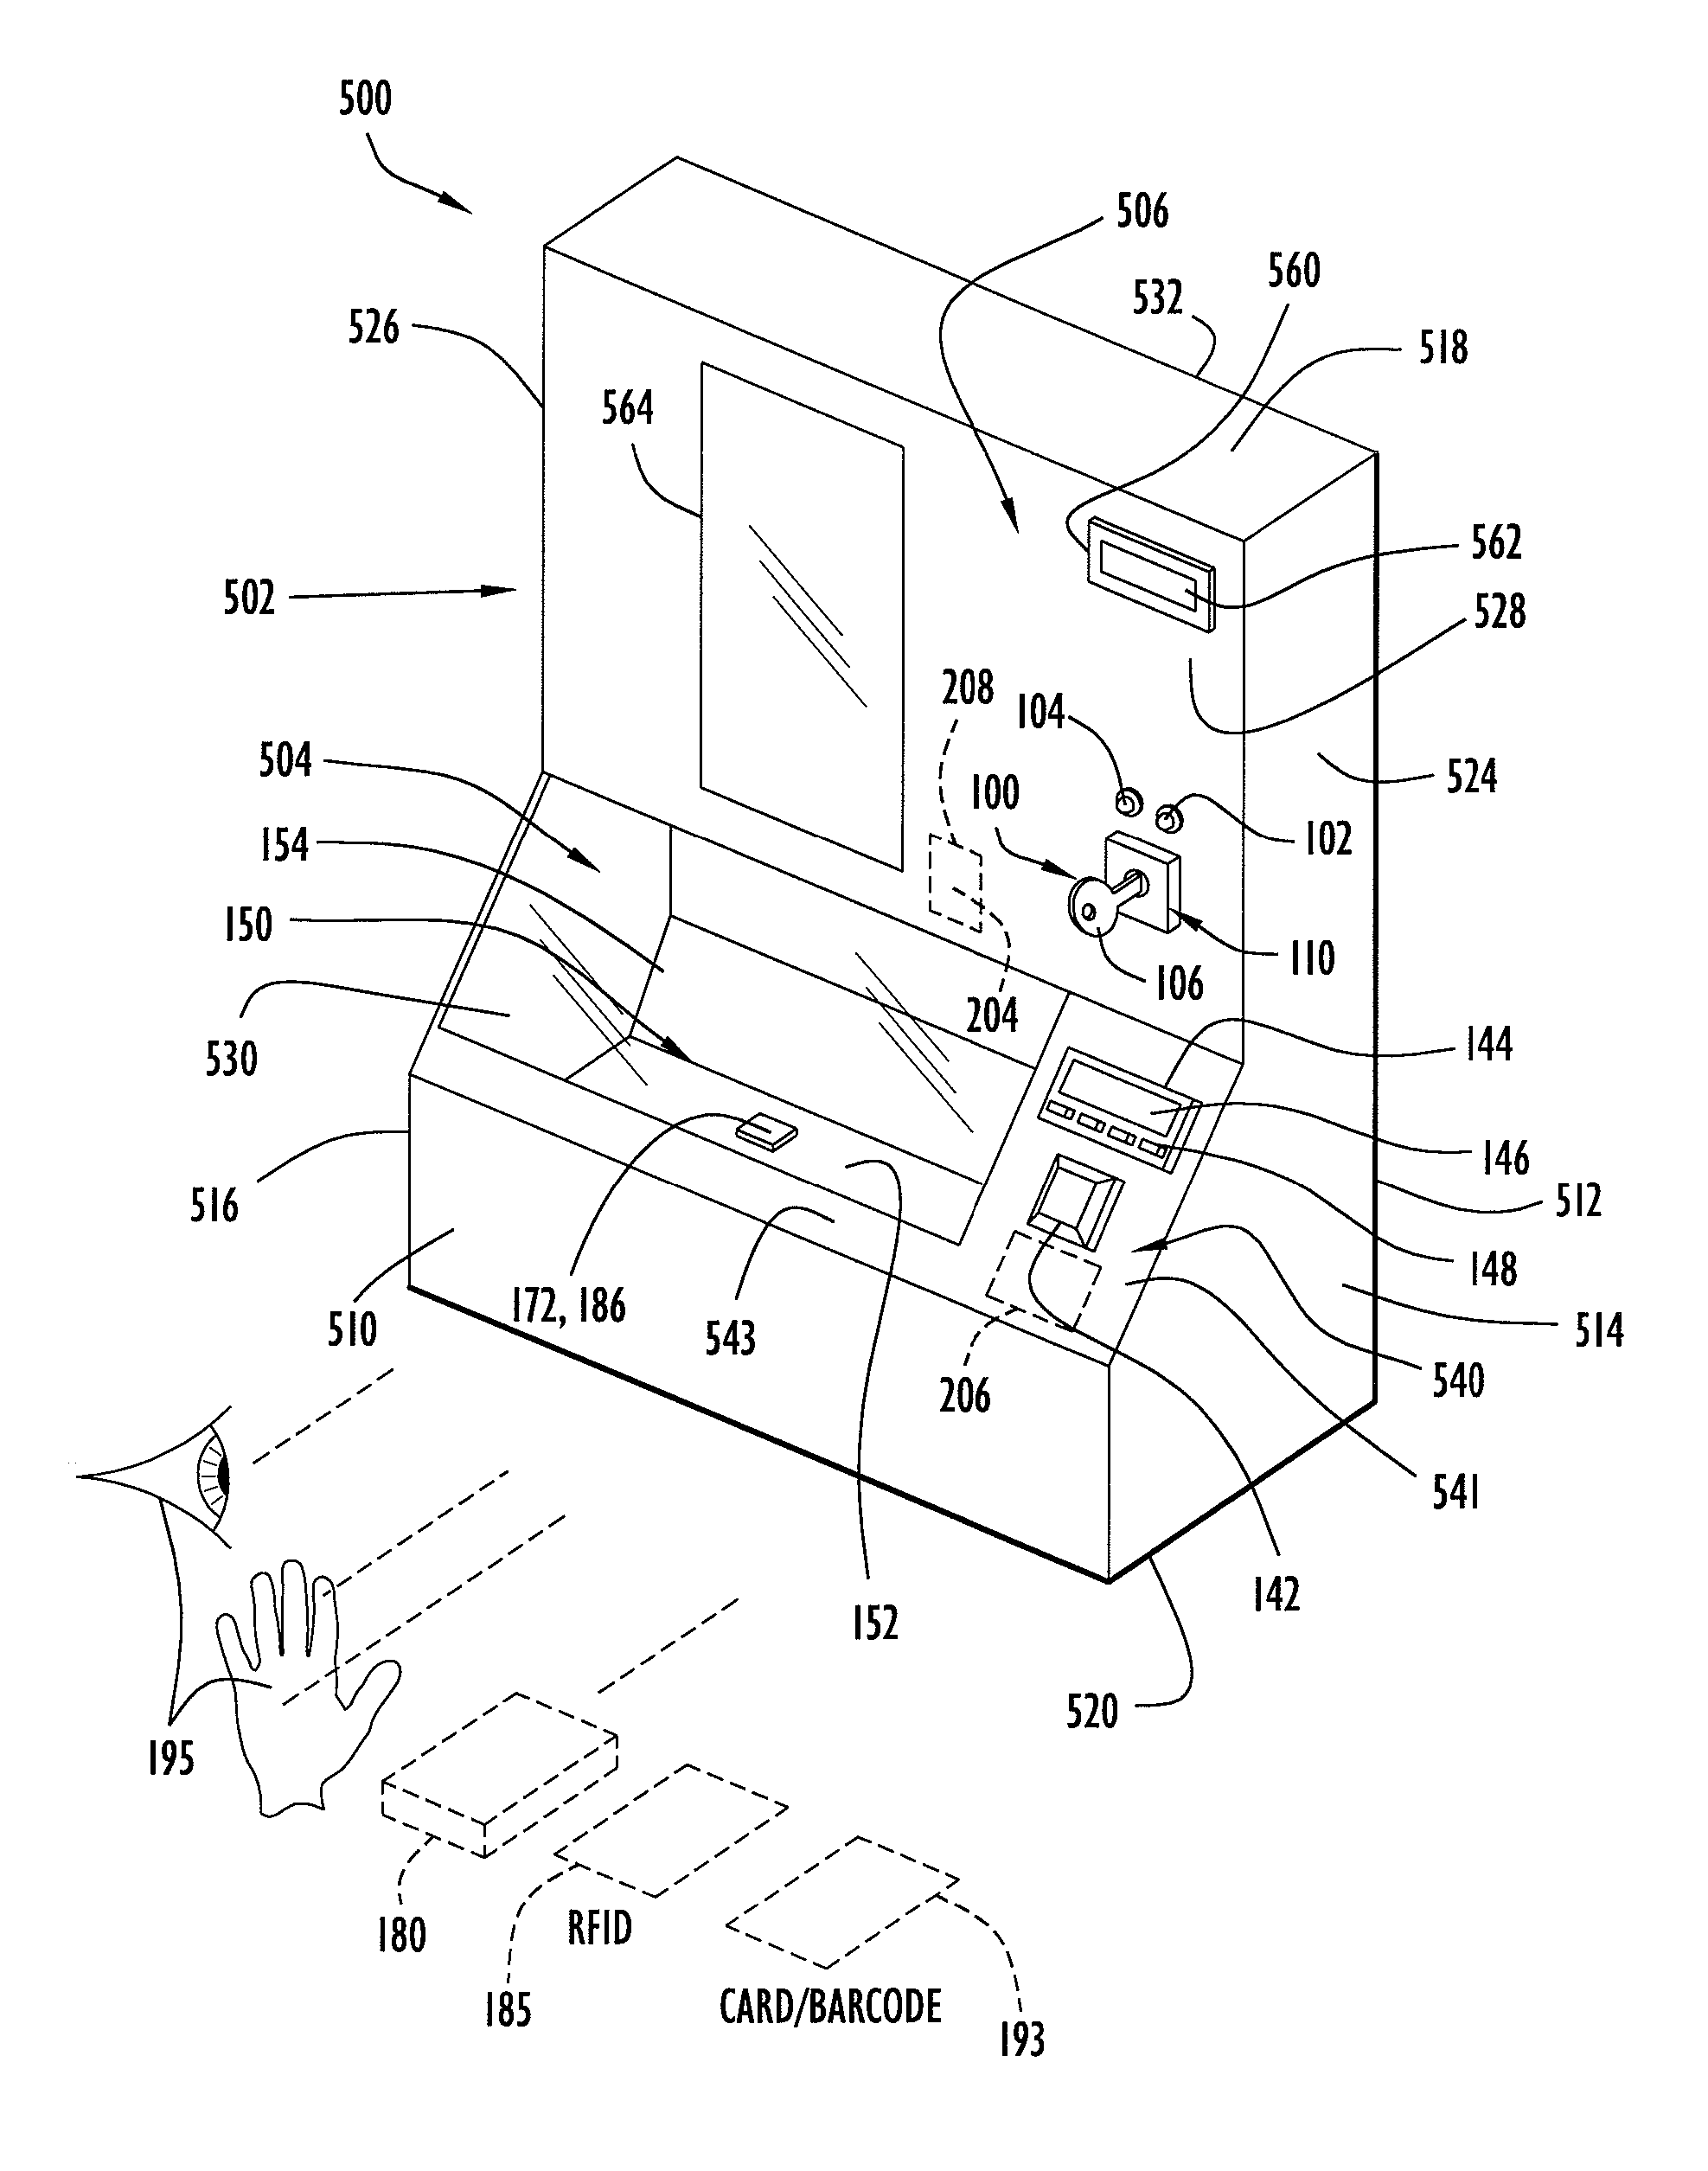 Method and Apparatus for Securely Storing Medical Items Within a Thermal Treatment System